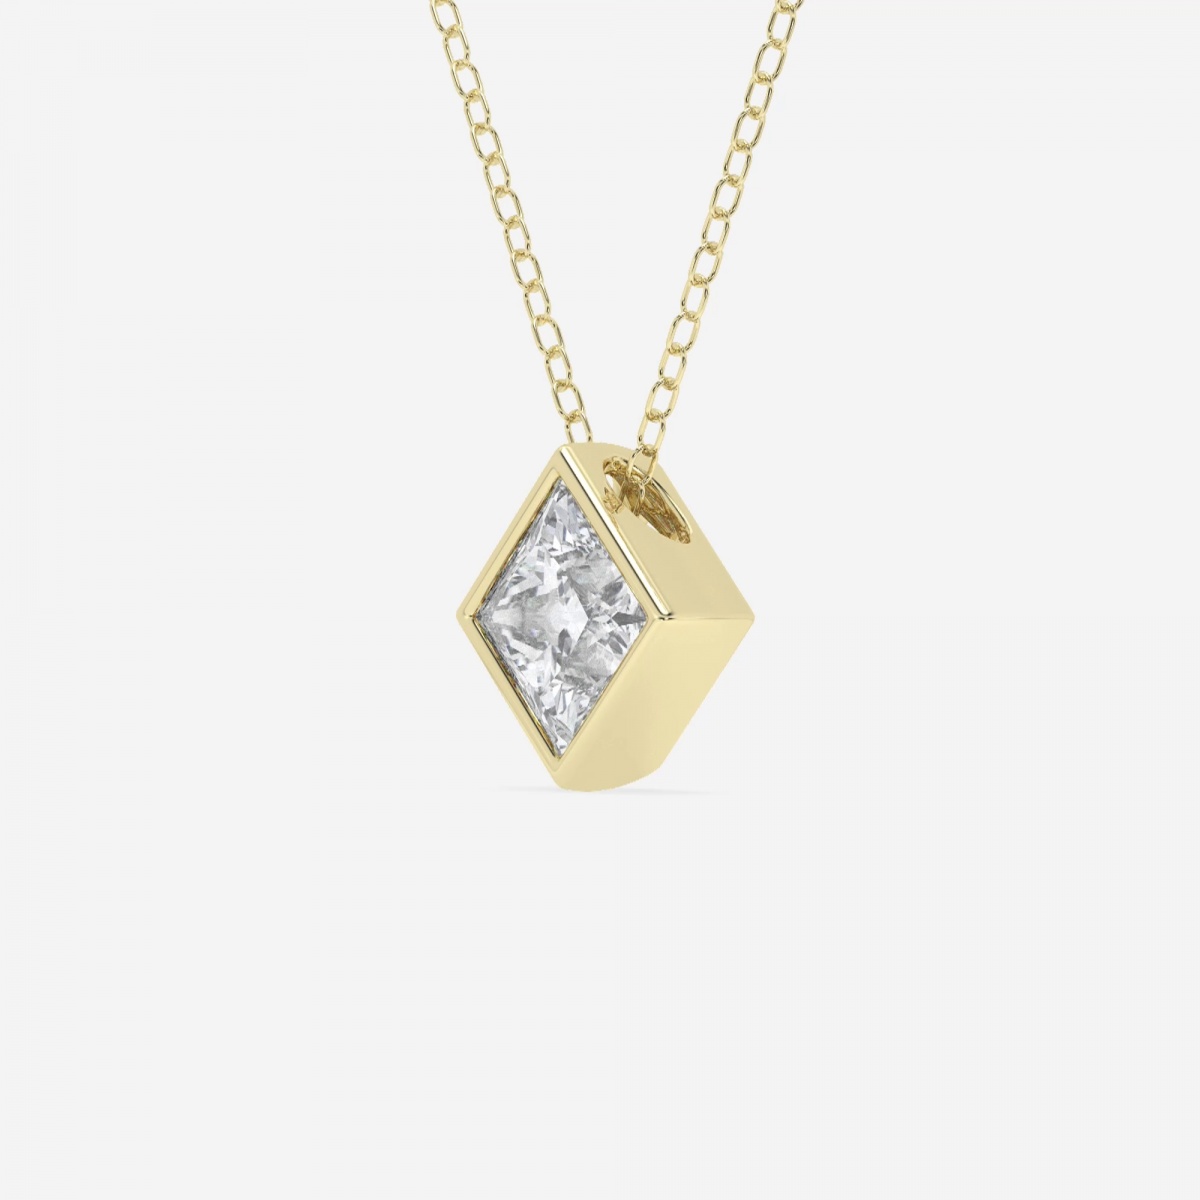 Additional Image 1 for  1 ctw Princess Lab Grown Diamond Bezel Set Solitaire Pendant with Adjustable Chain